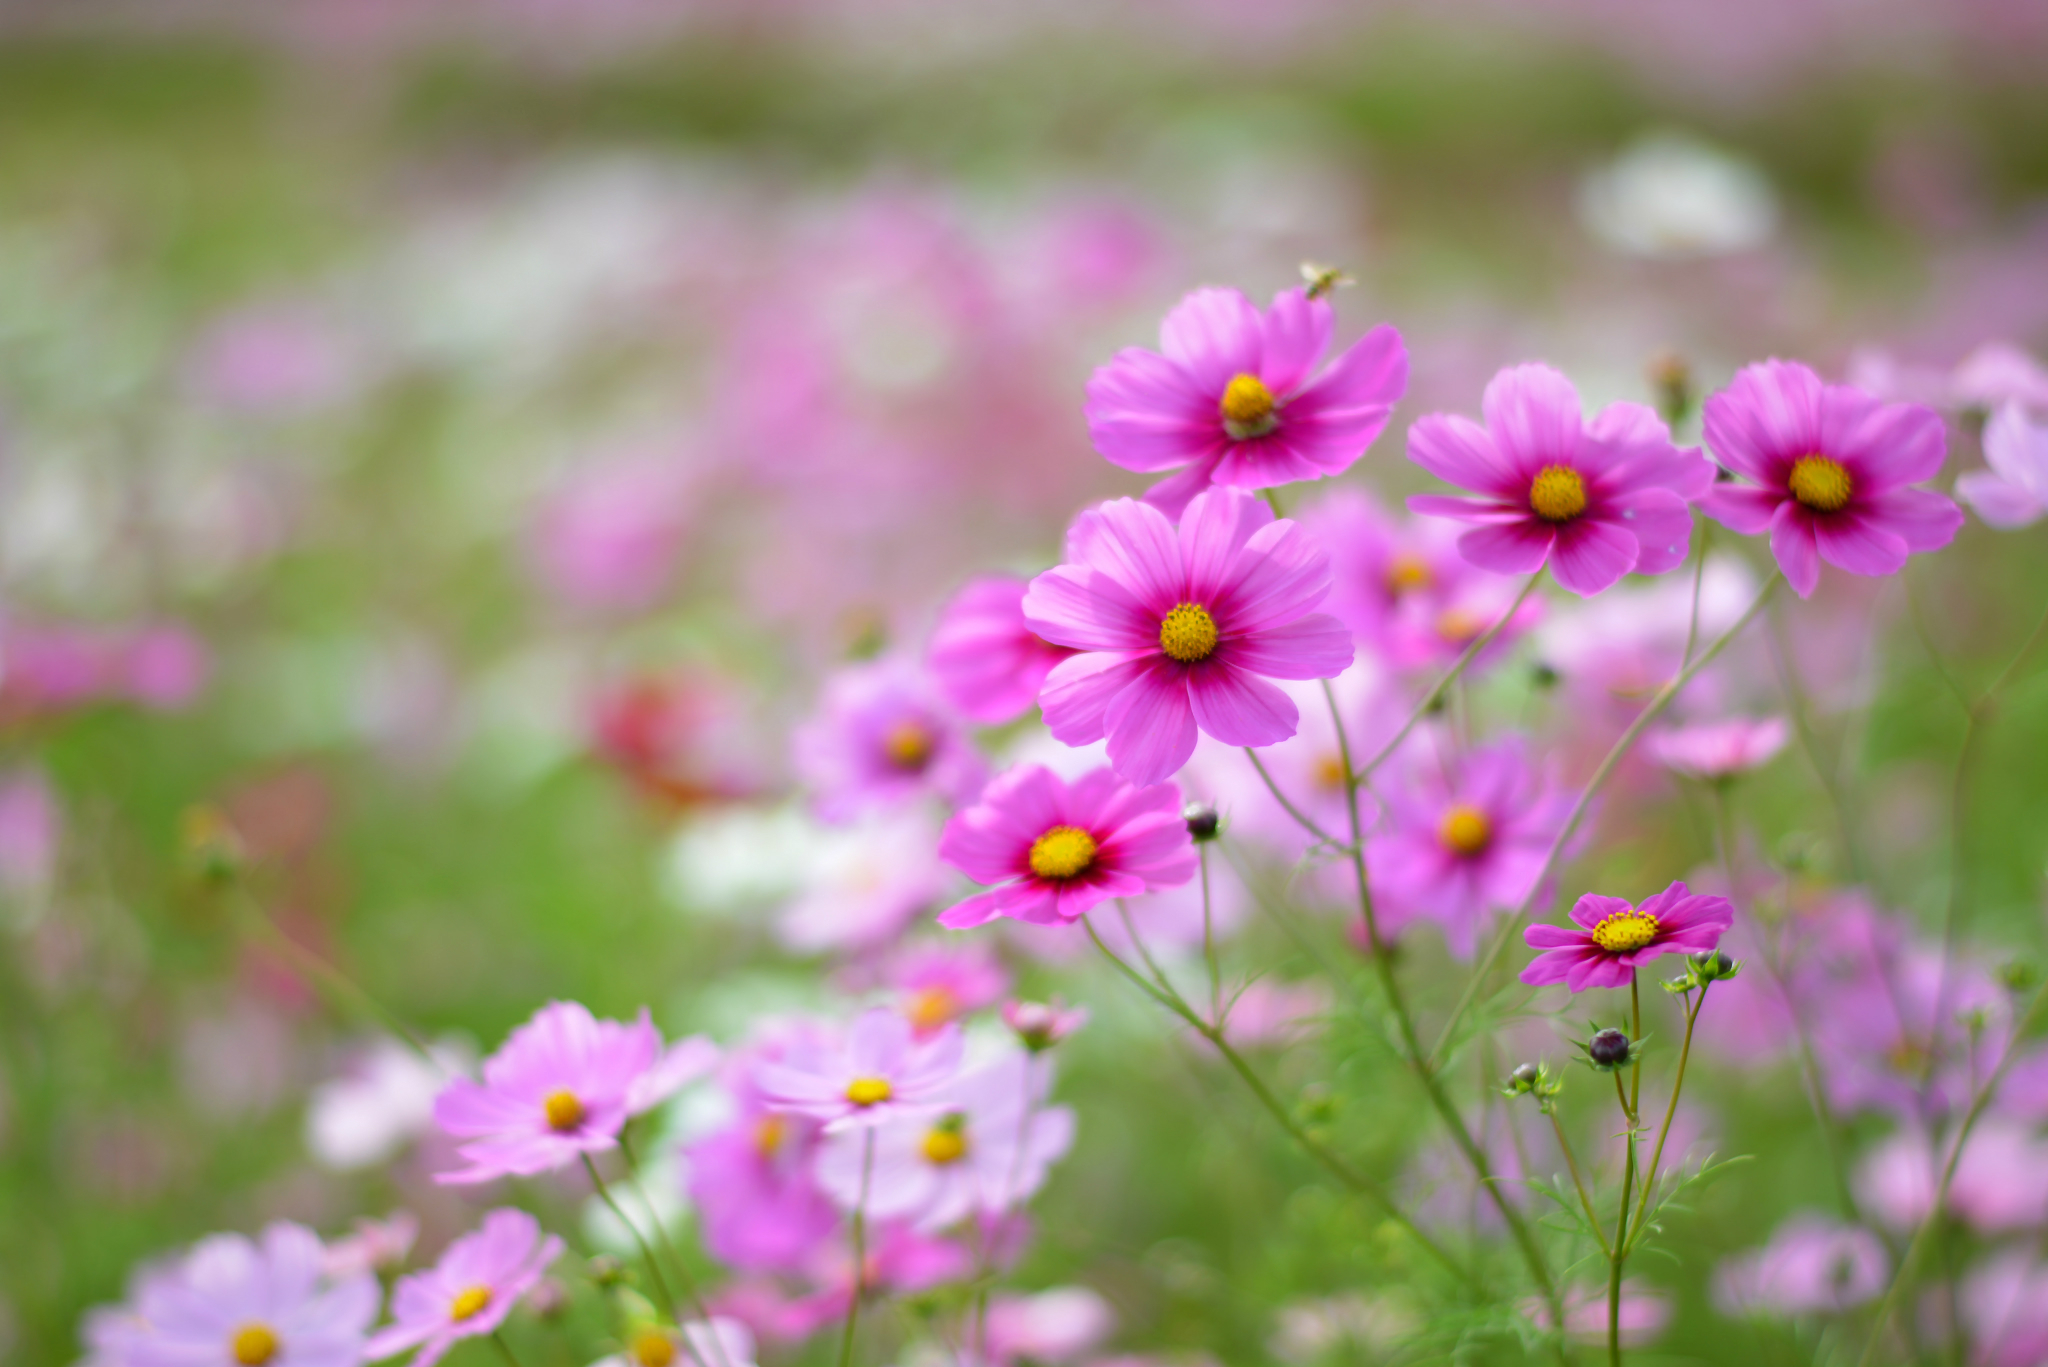 Cosmos Flower Growing In The Garden Wallpaper And Image